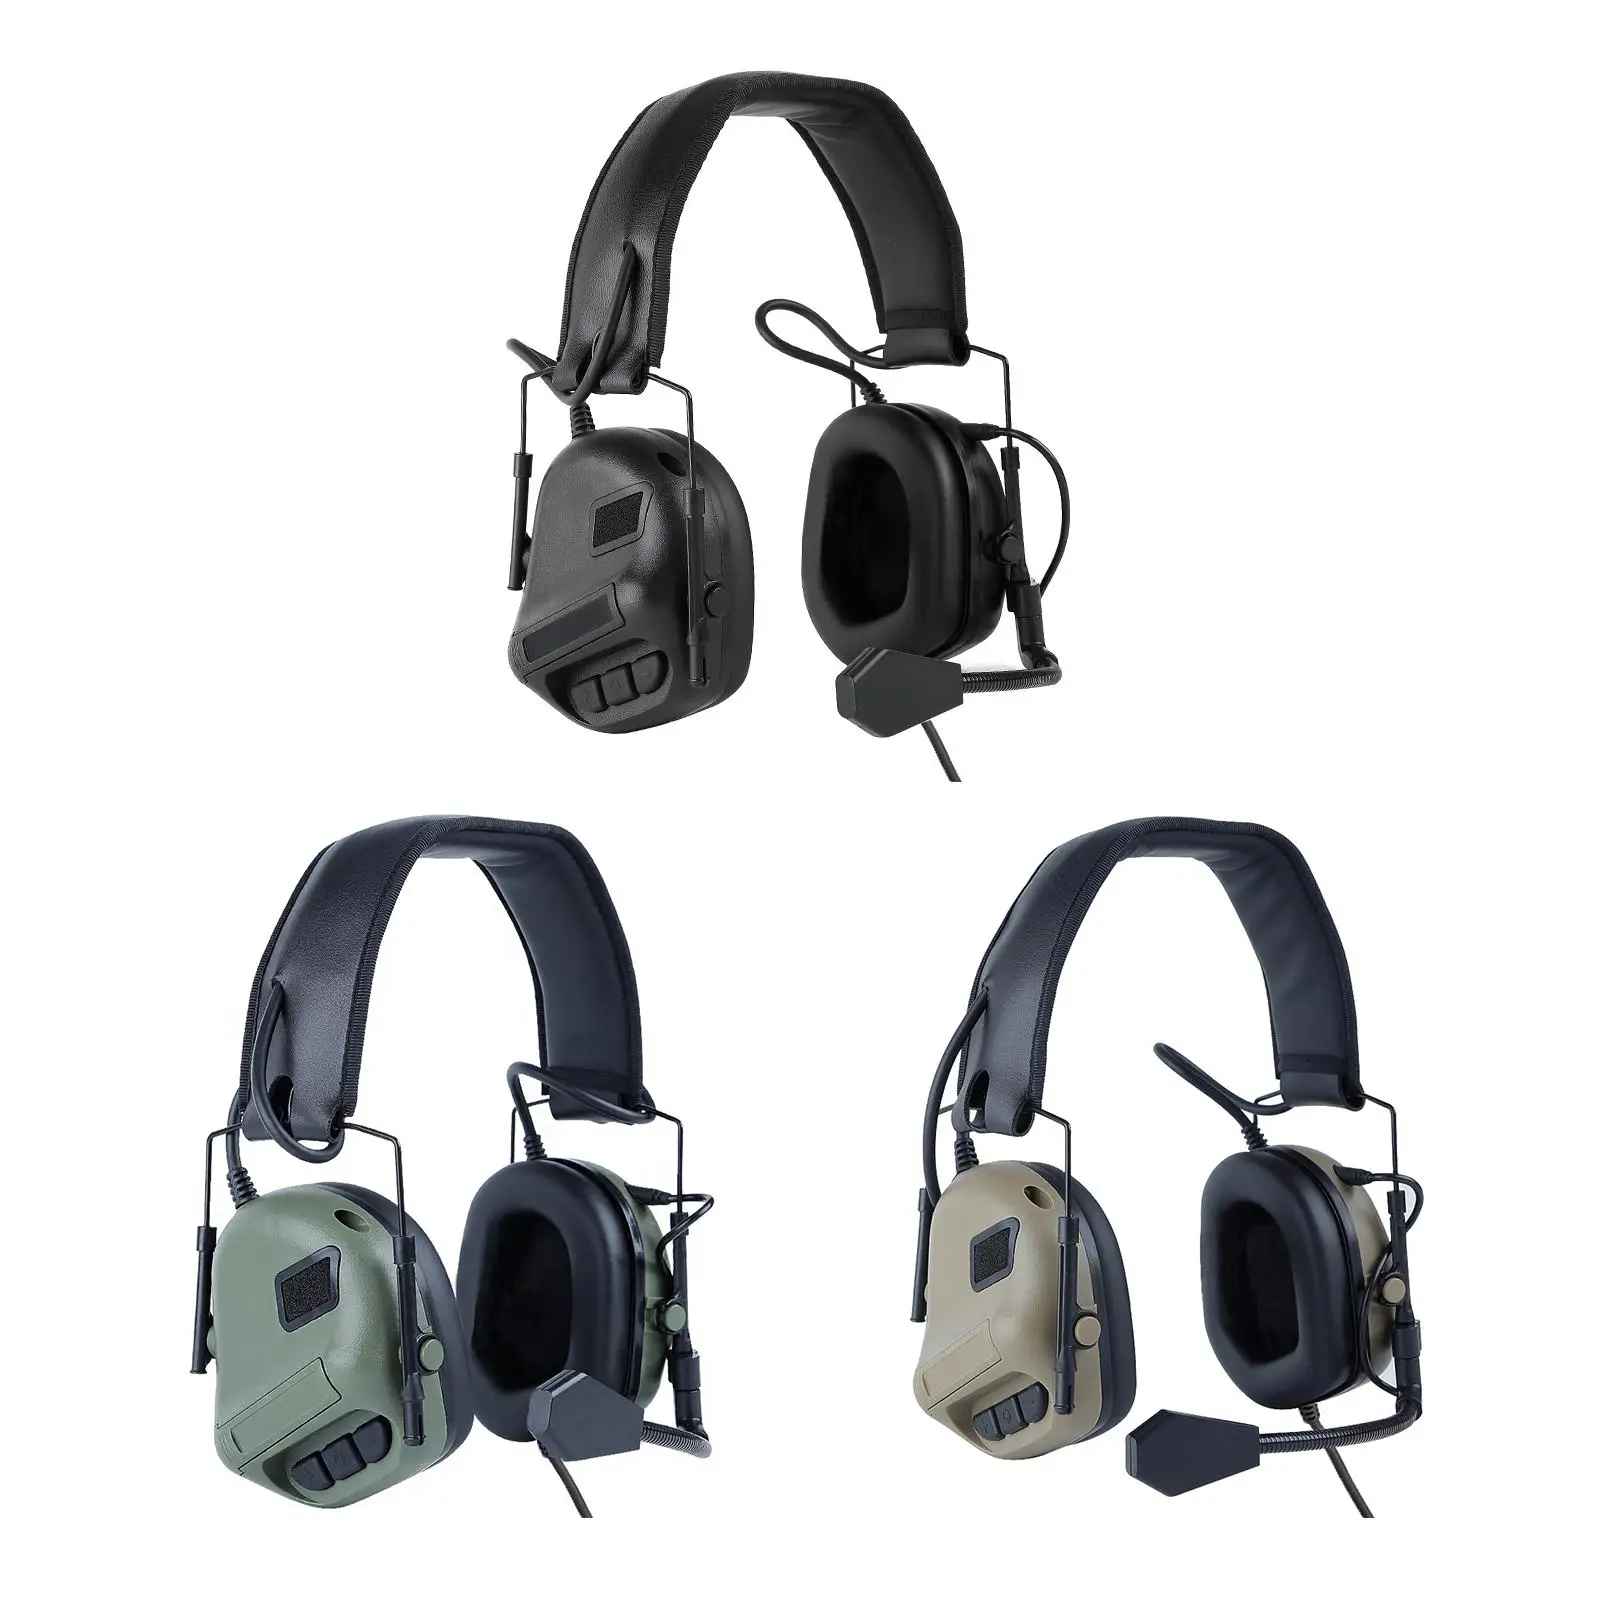 Electronic Ear Muffs Adjustable Ear Protection Noise Cancelling Anti Noise Snr 27dB for Shooting Construction Team Activities